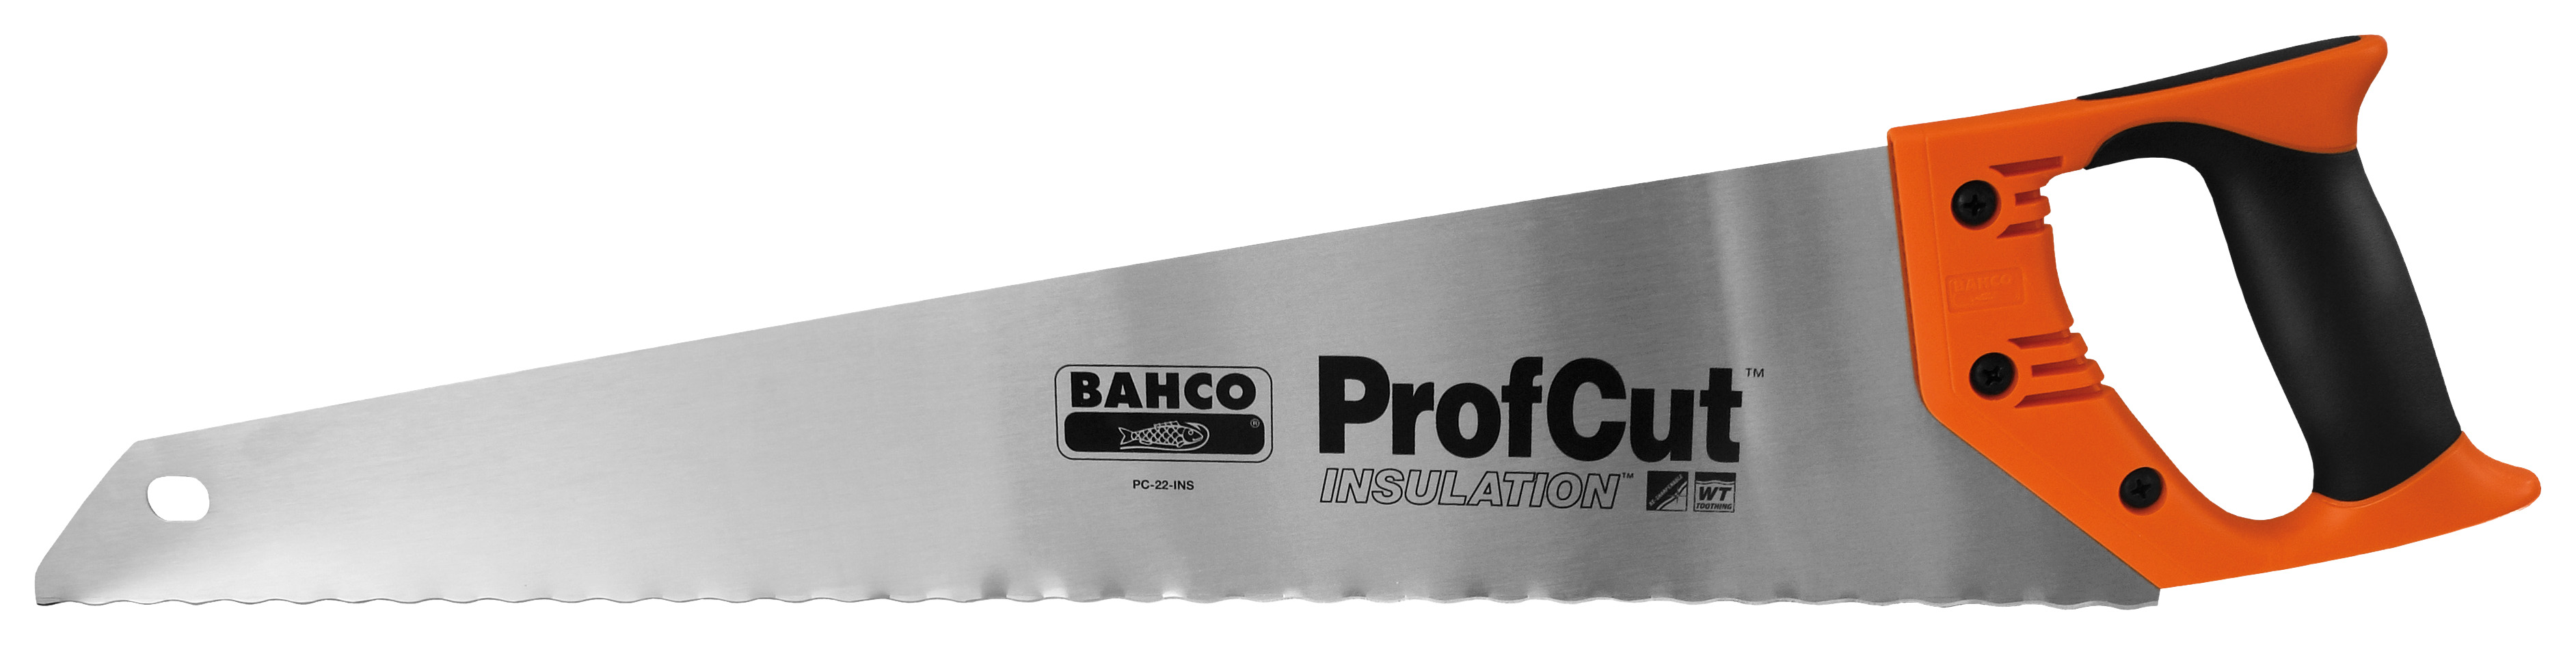 Image of Bahco PC-22-INS Profcut Insulation Saw - 22in / 550mm